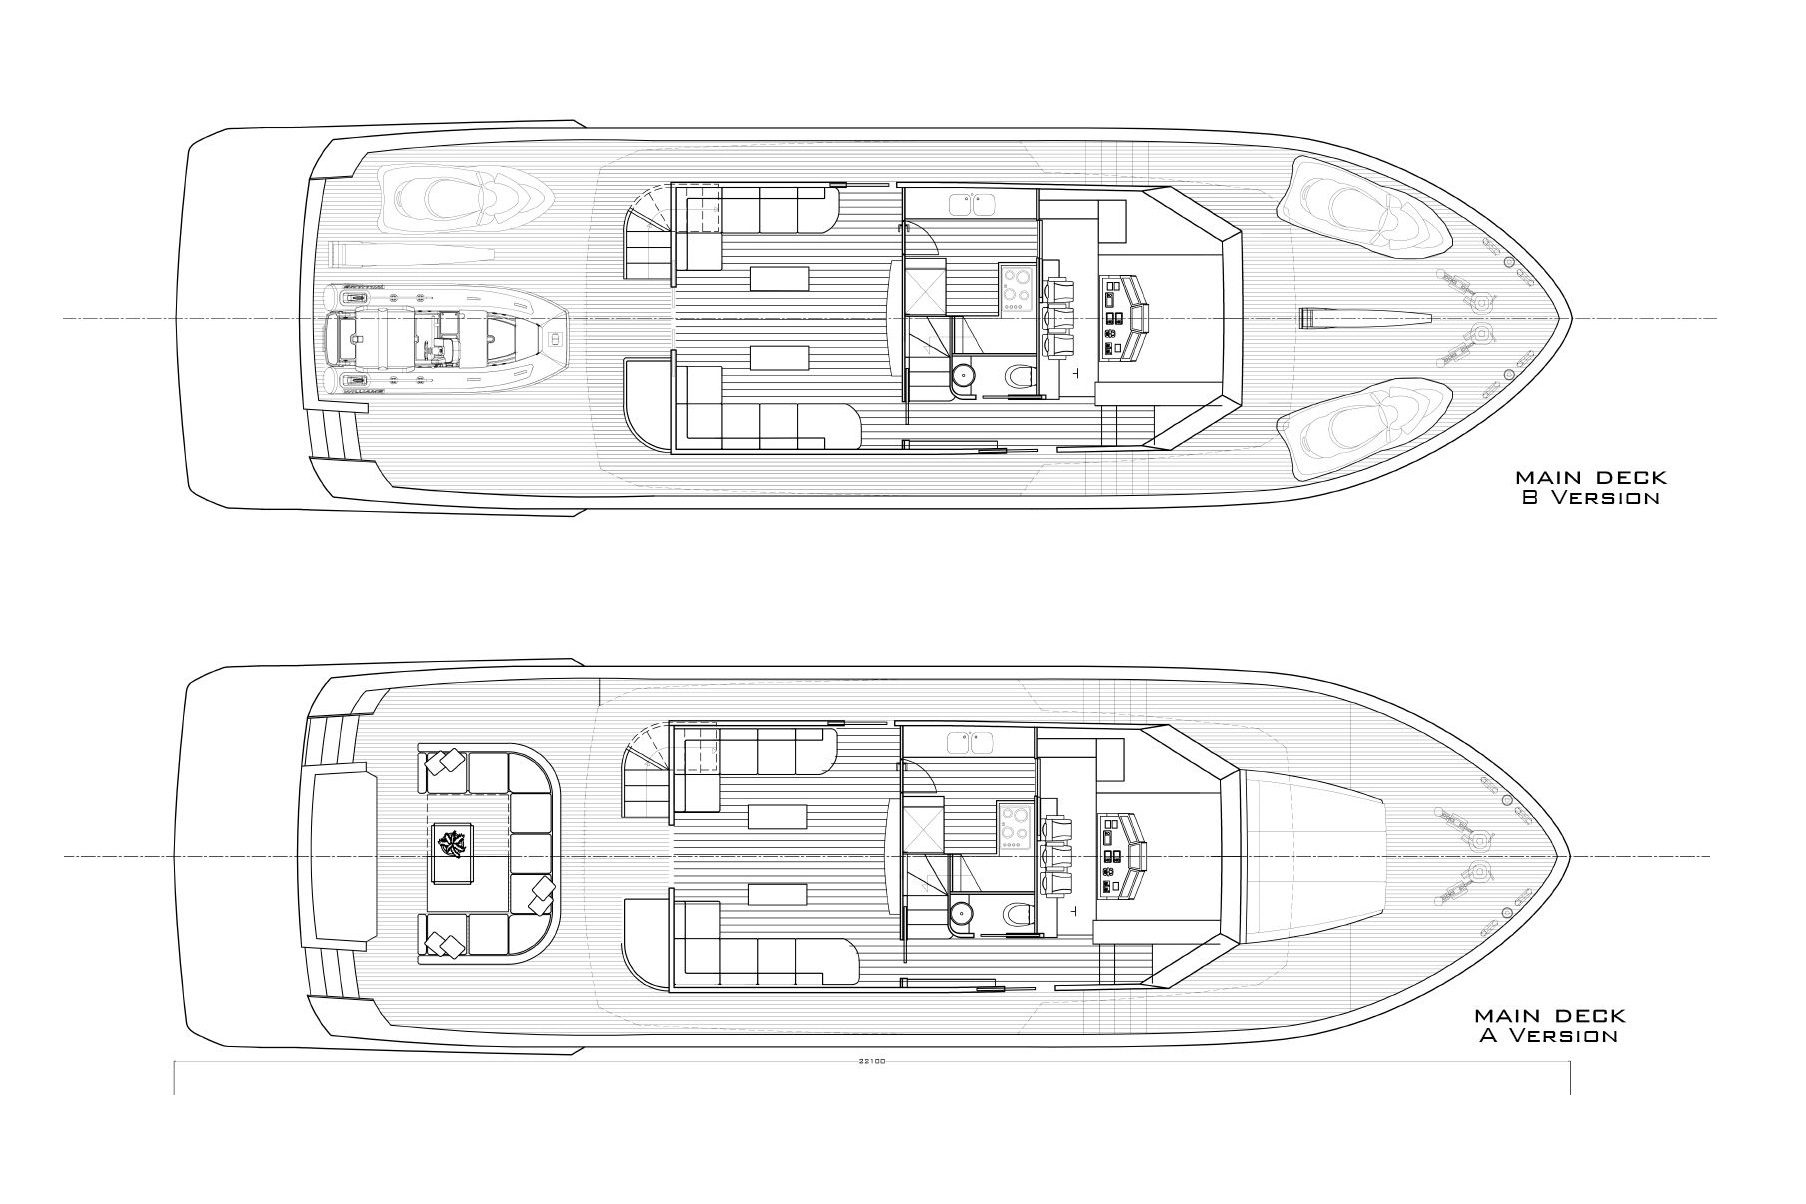 Deck Plan of M/Y Fast Cruise 22 New Build Yacht for Sale